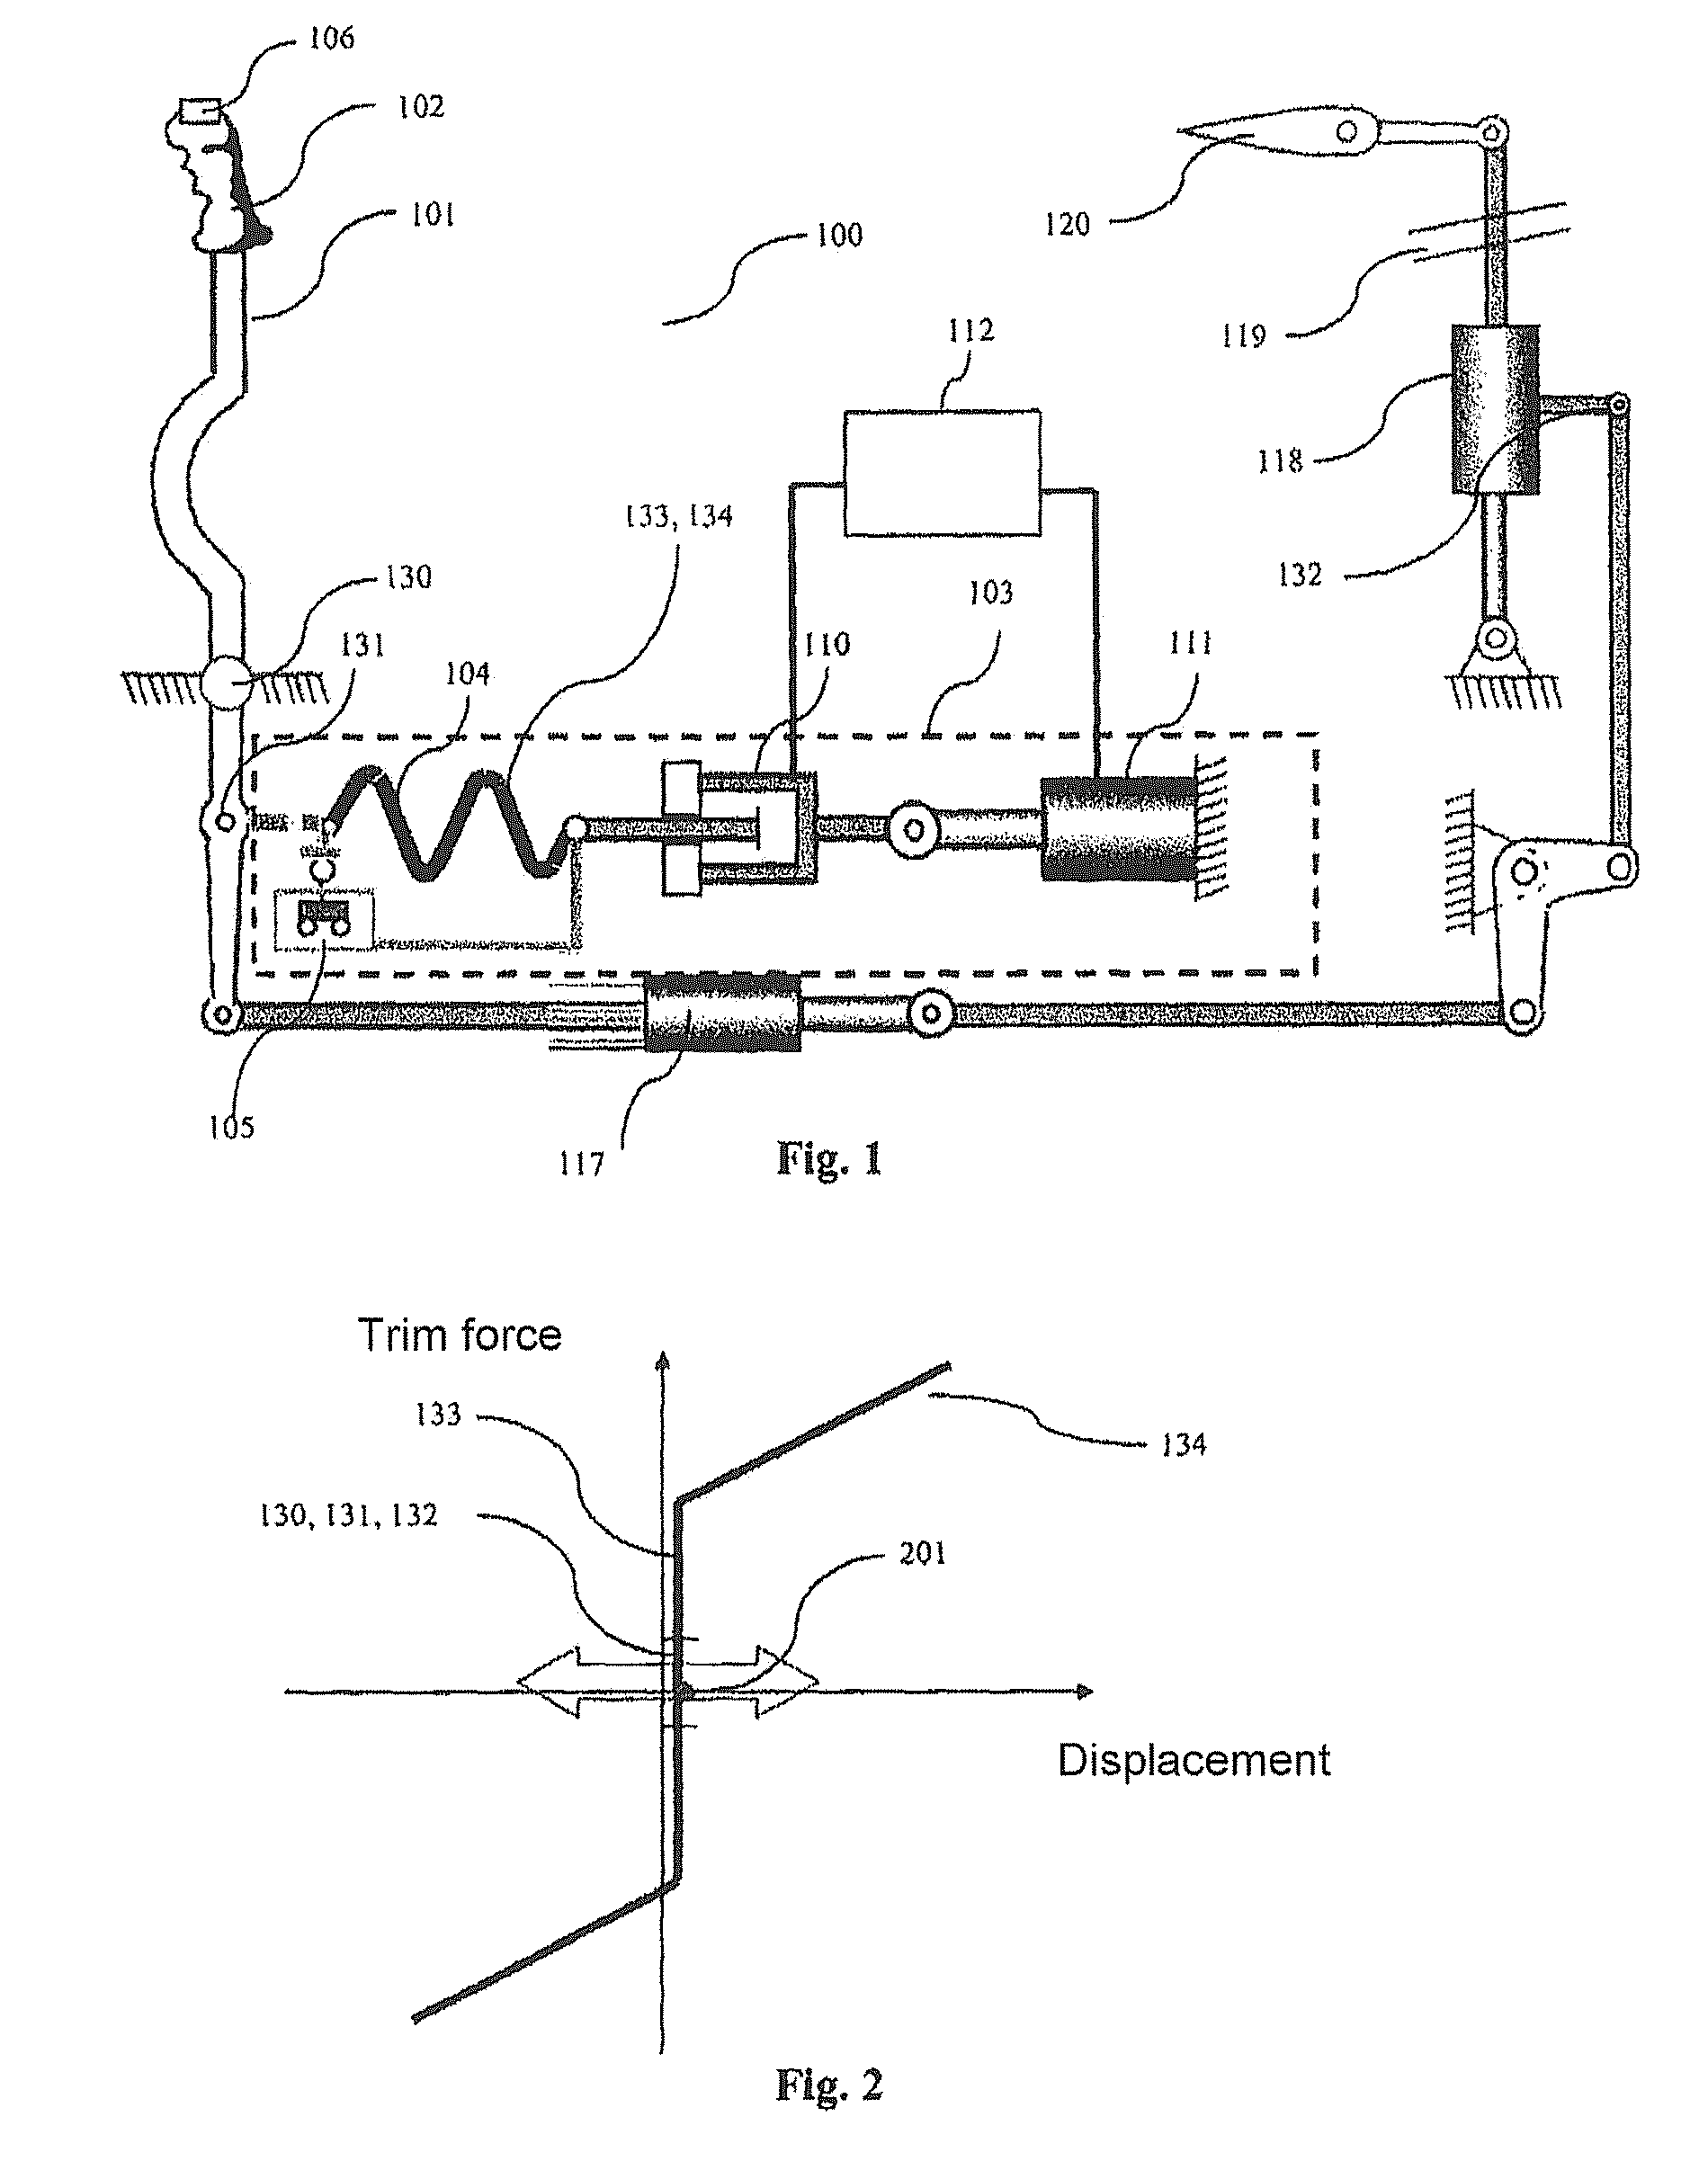 Device for switchable pilot control forces